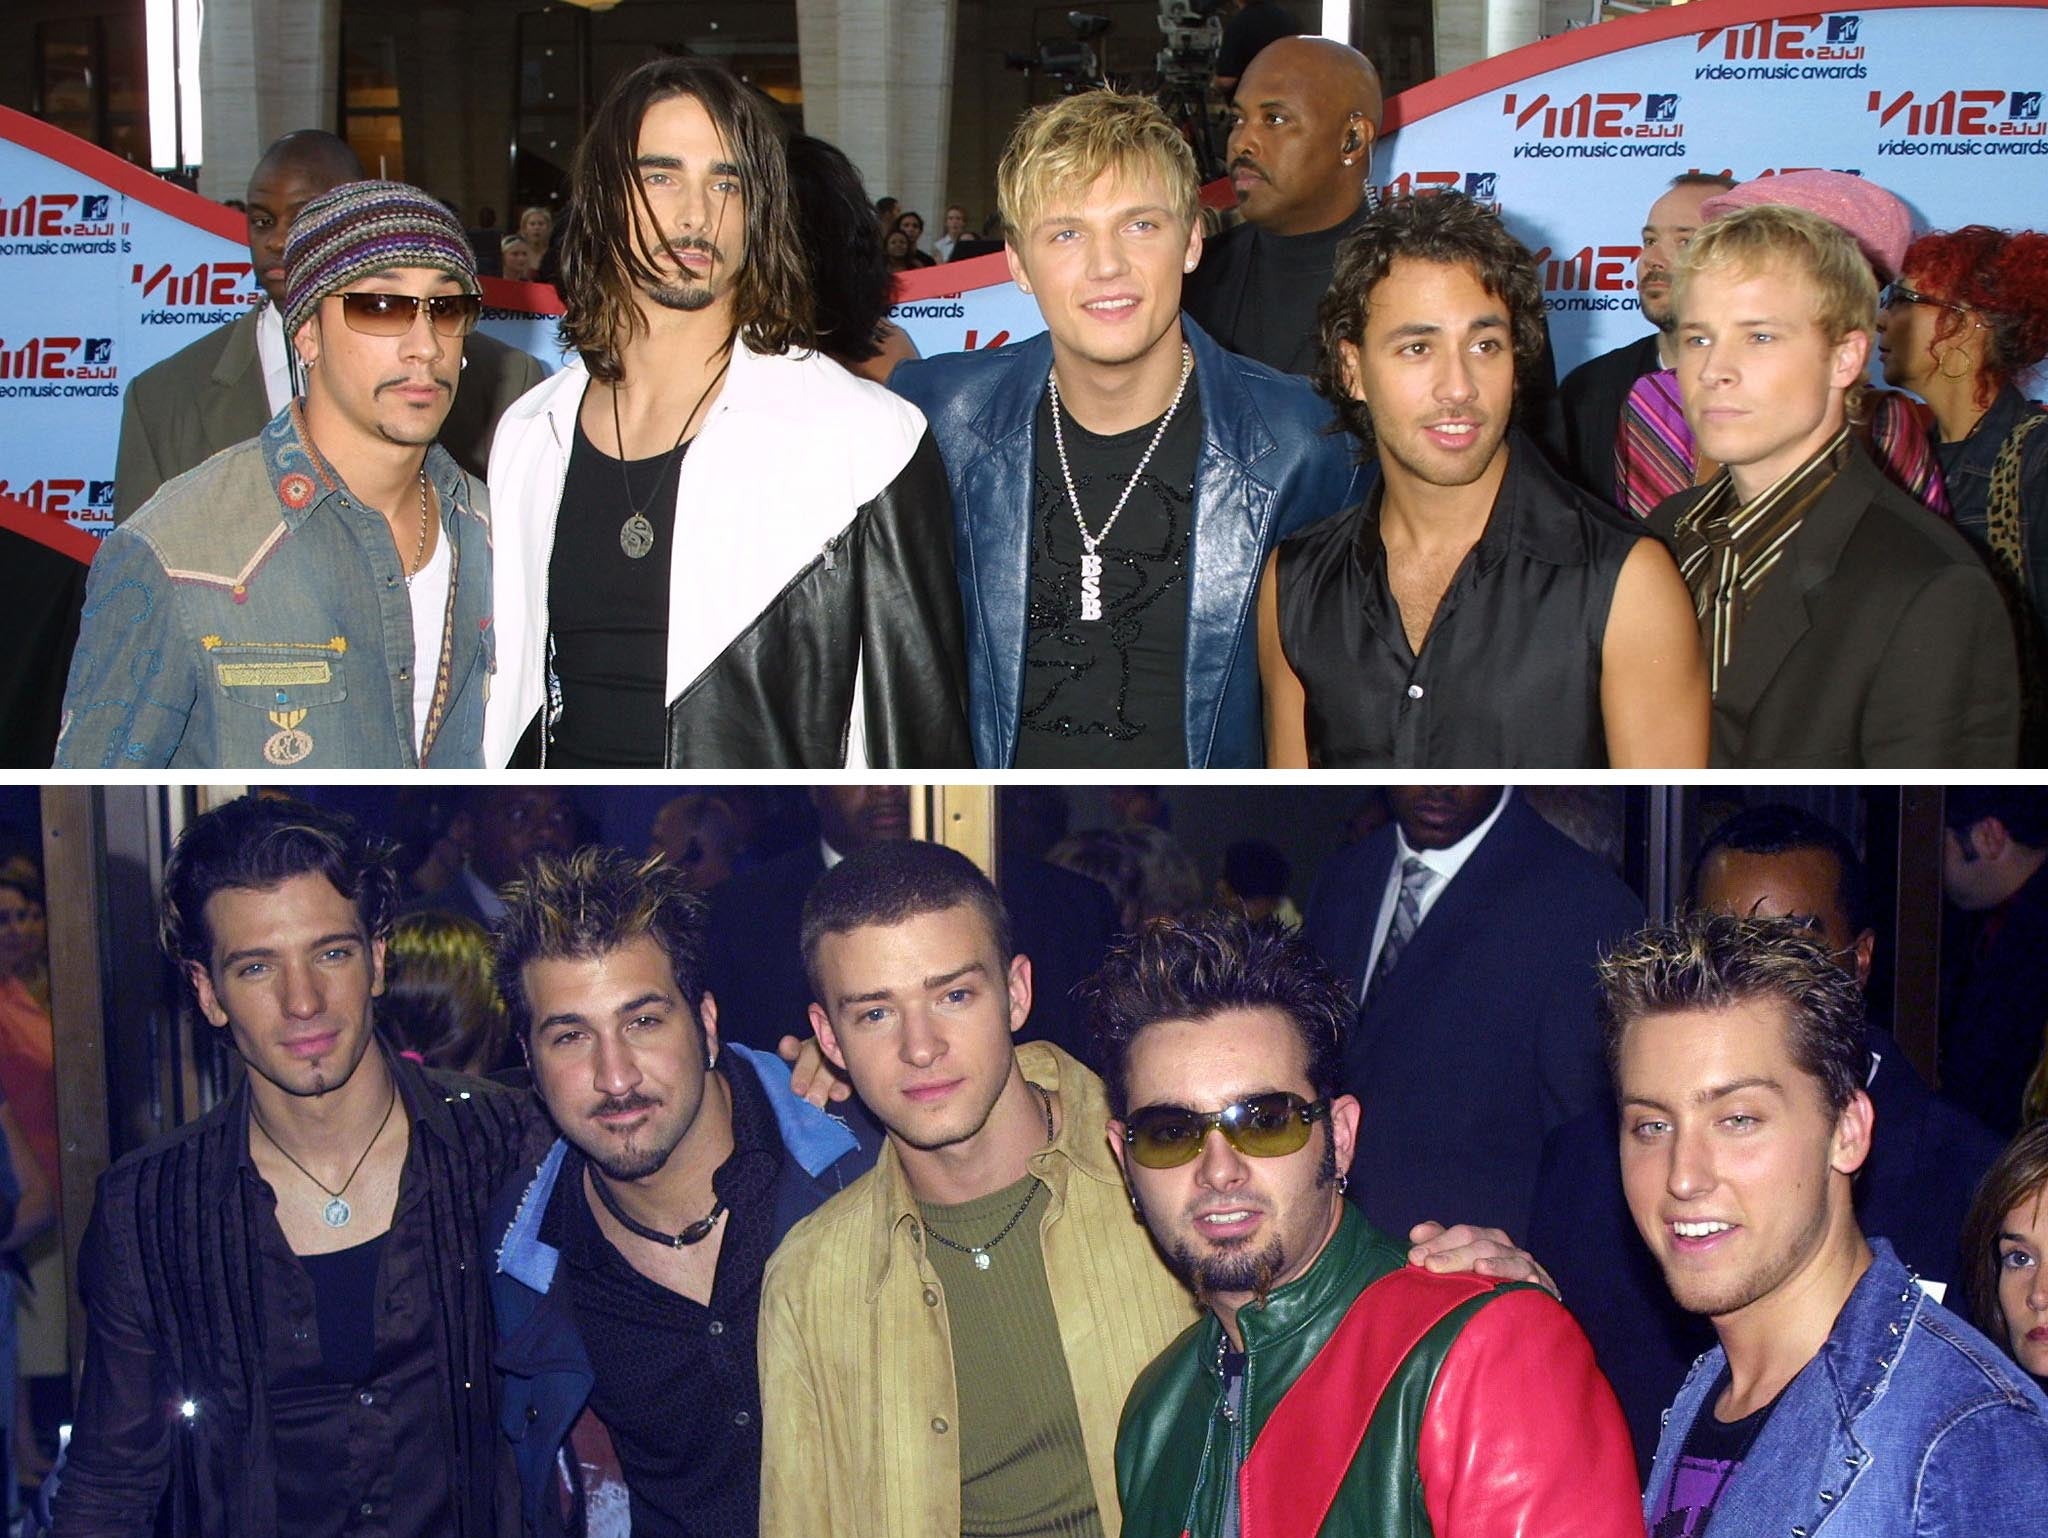 The Backstreet Boys and NSync are teaming up to work on a zombie horror movie